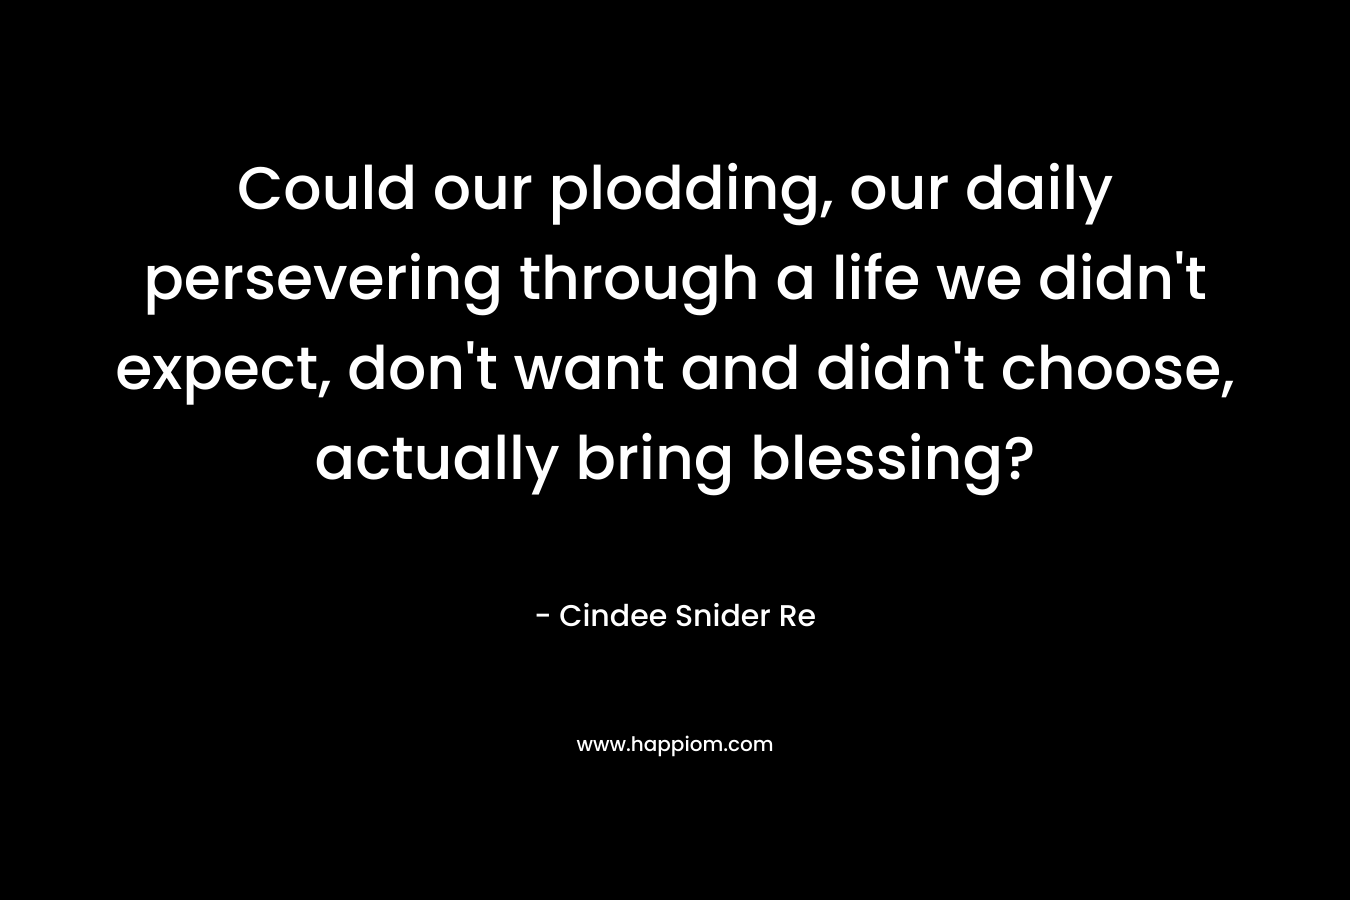 Could our plodding, our daily persevering through a life we didn't expect, don't want and didn't choose, actually bring blessing?